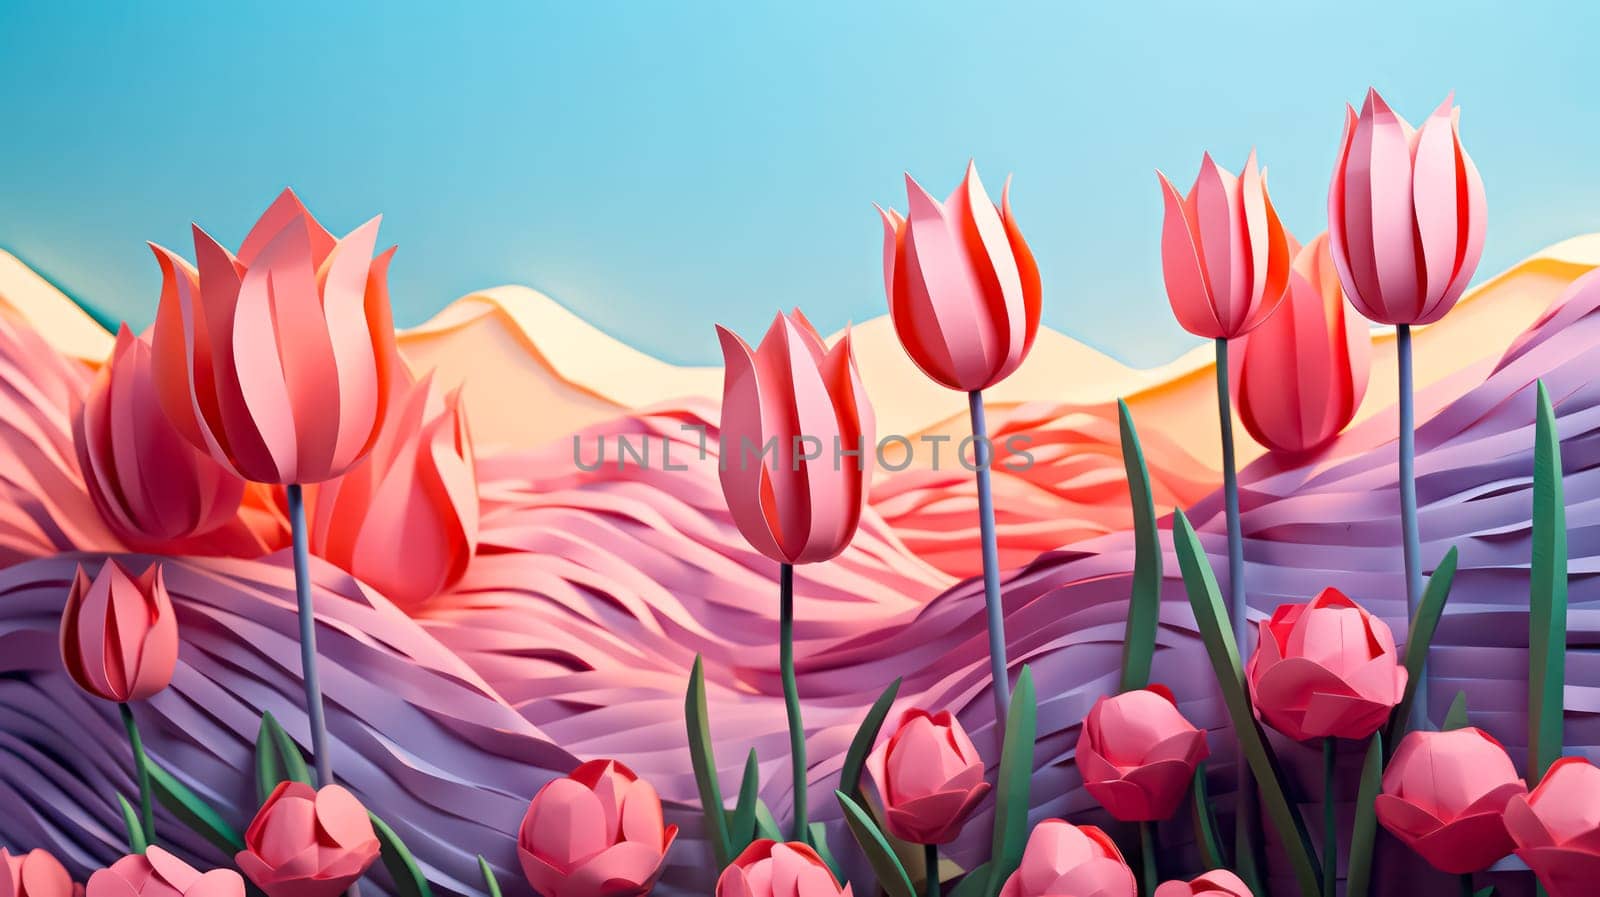 Ephemeral beauty crafted from paper vibrant tulips meticulously cut, forming a delightful composition against a colorful background. Artistry in bloom.